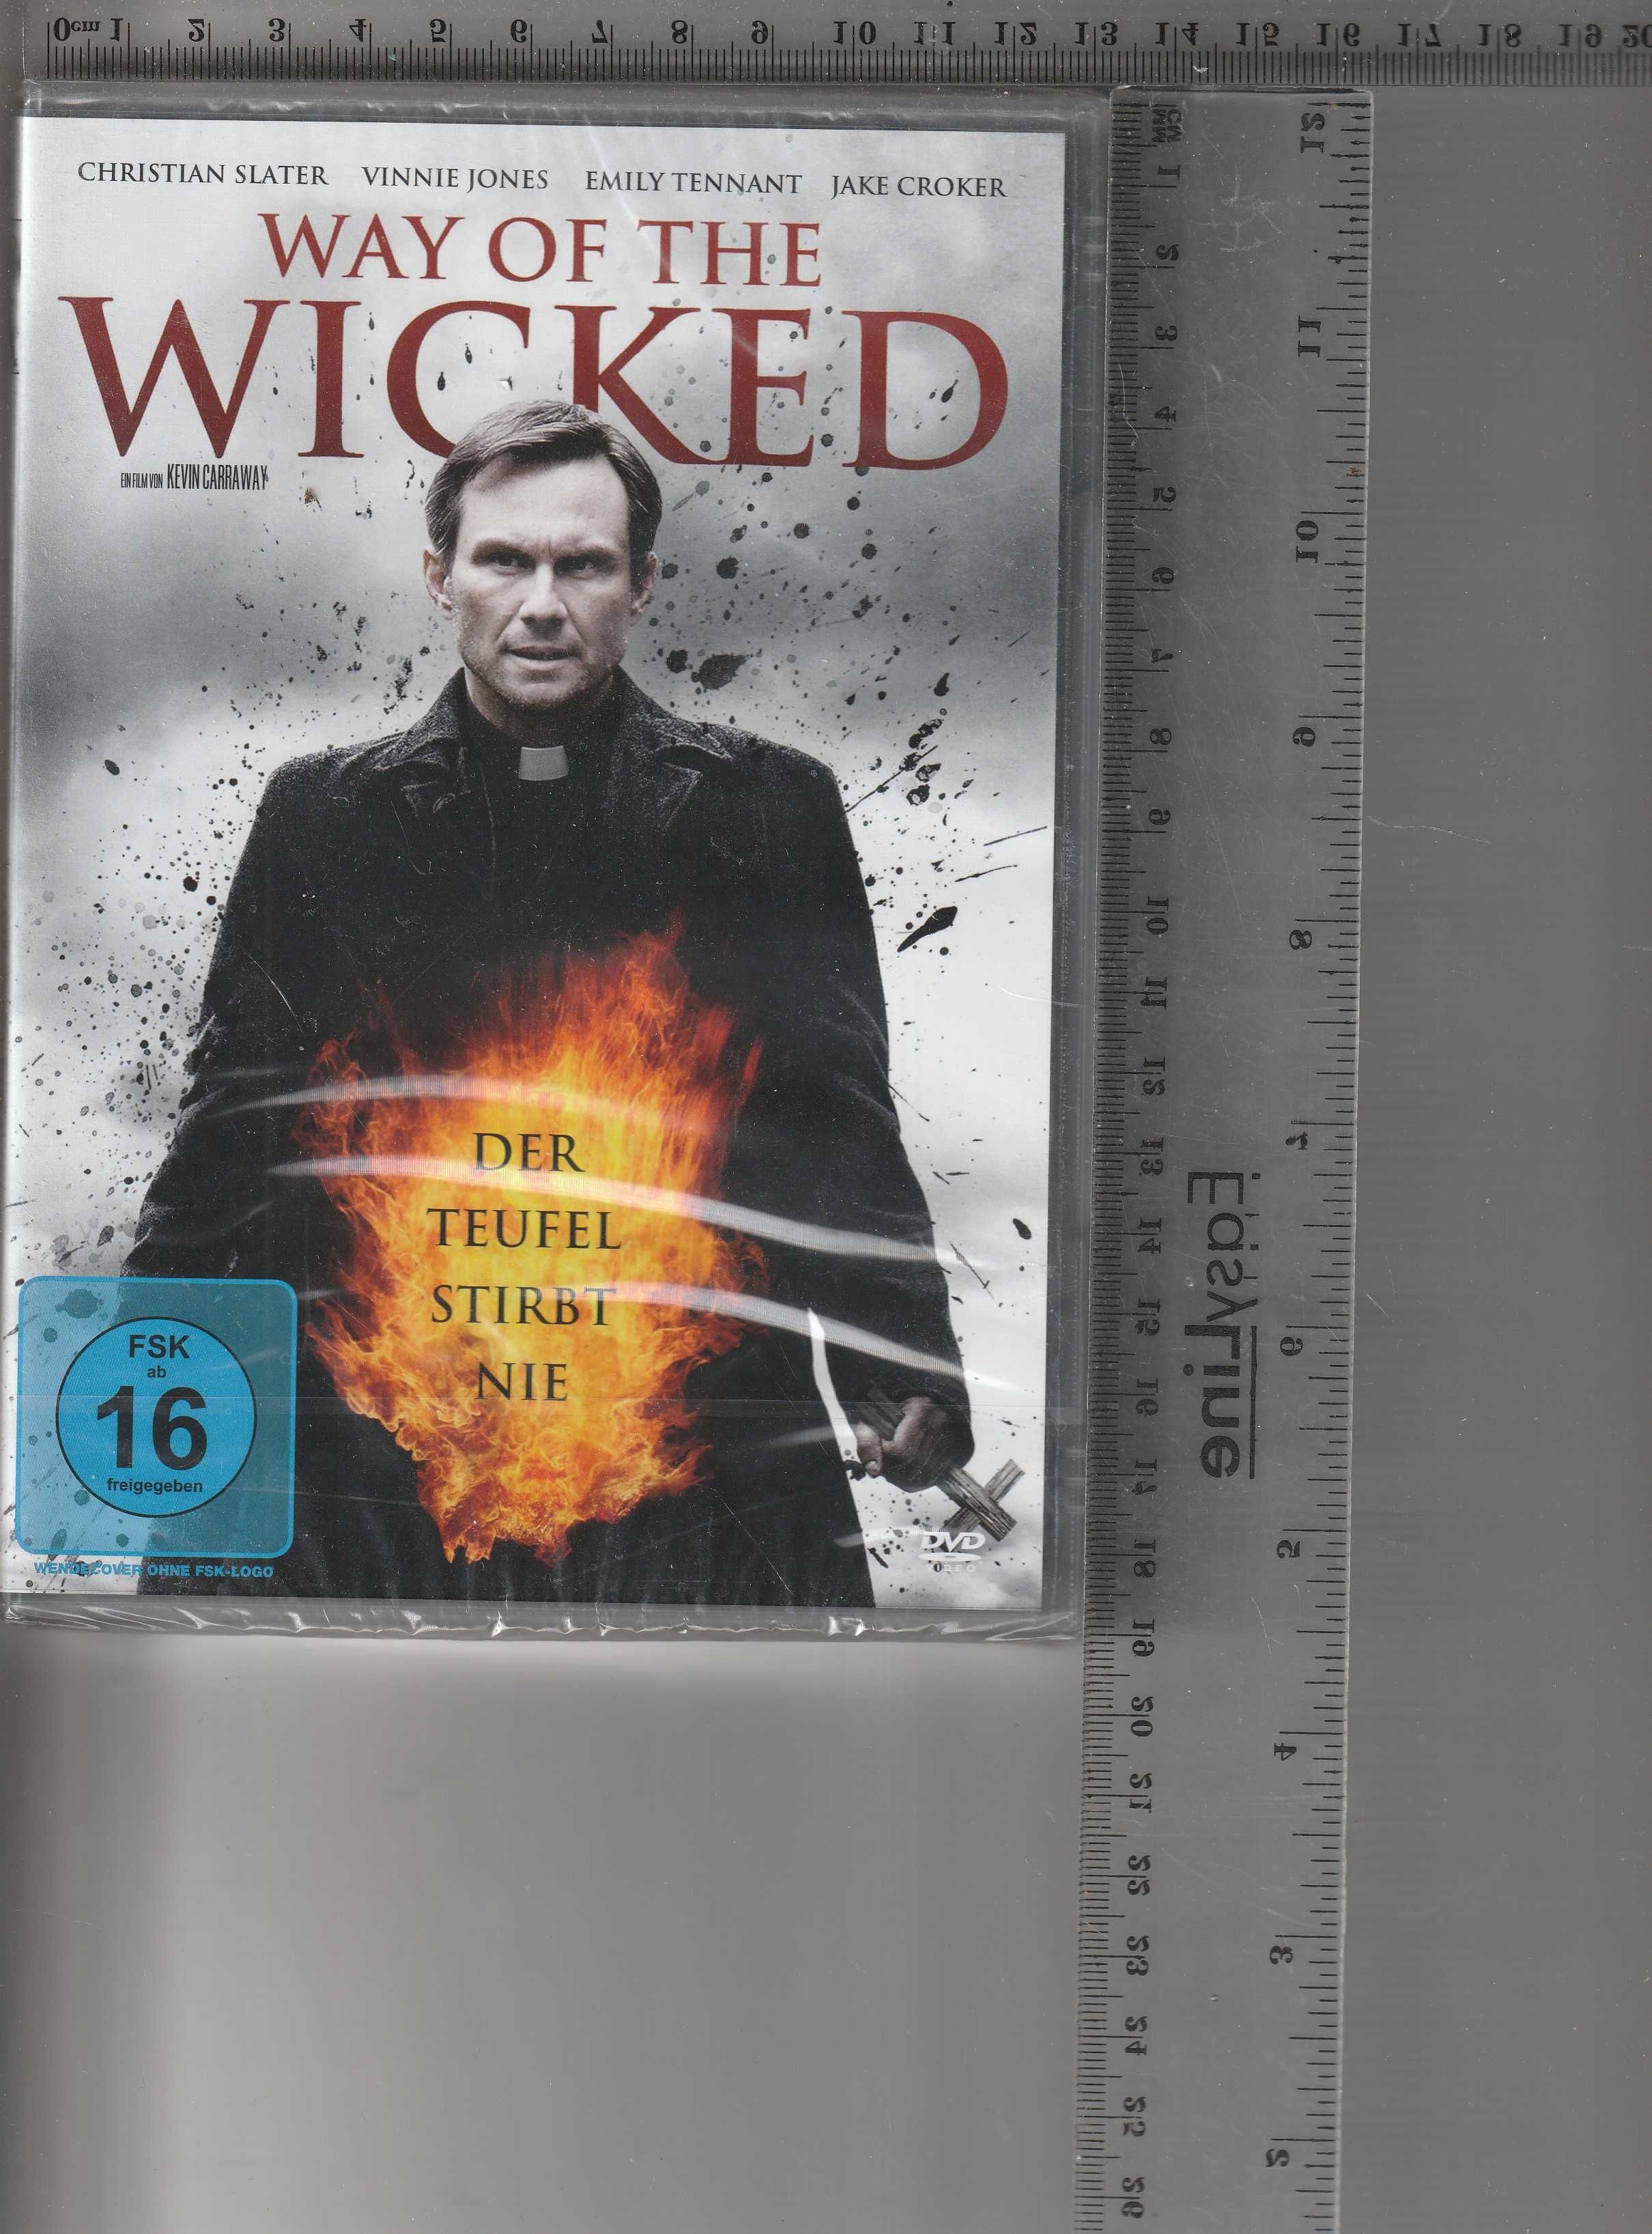 Way Of The Wicked Christian Slater DVD